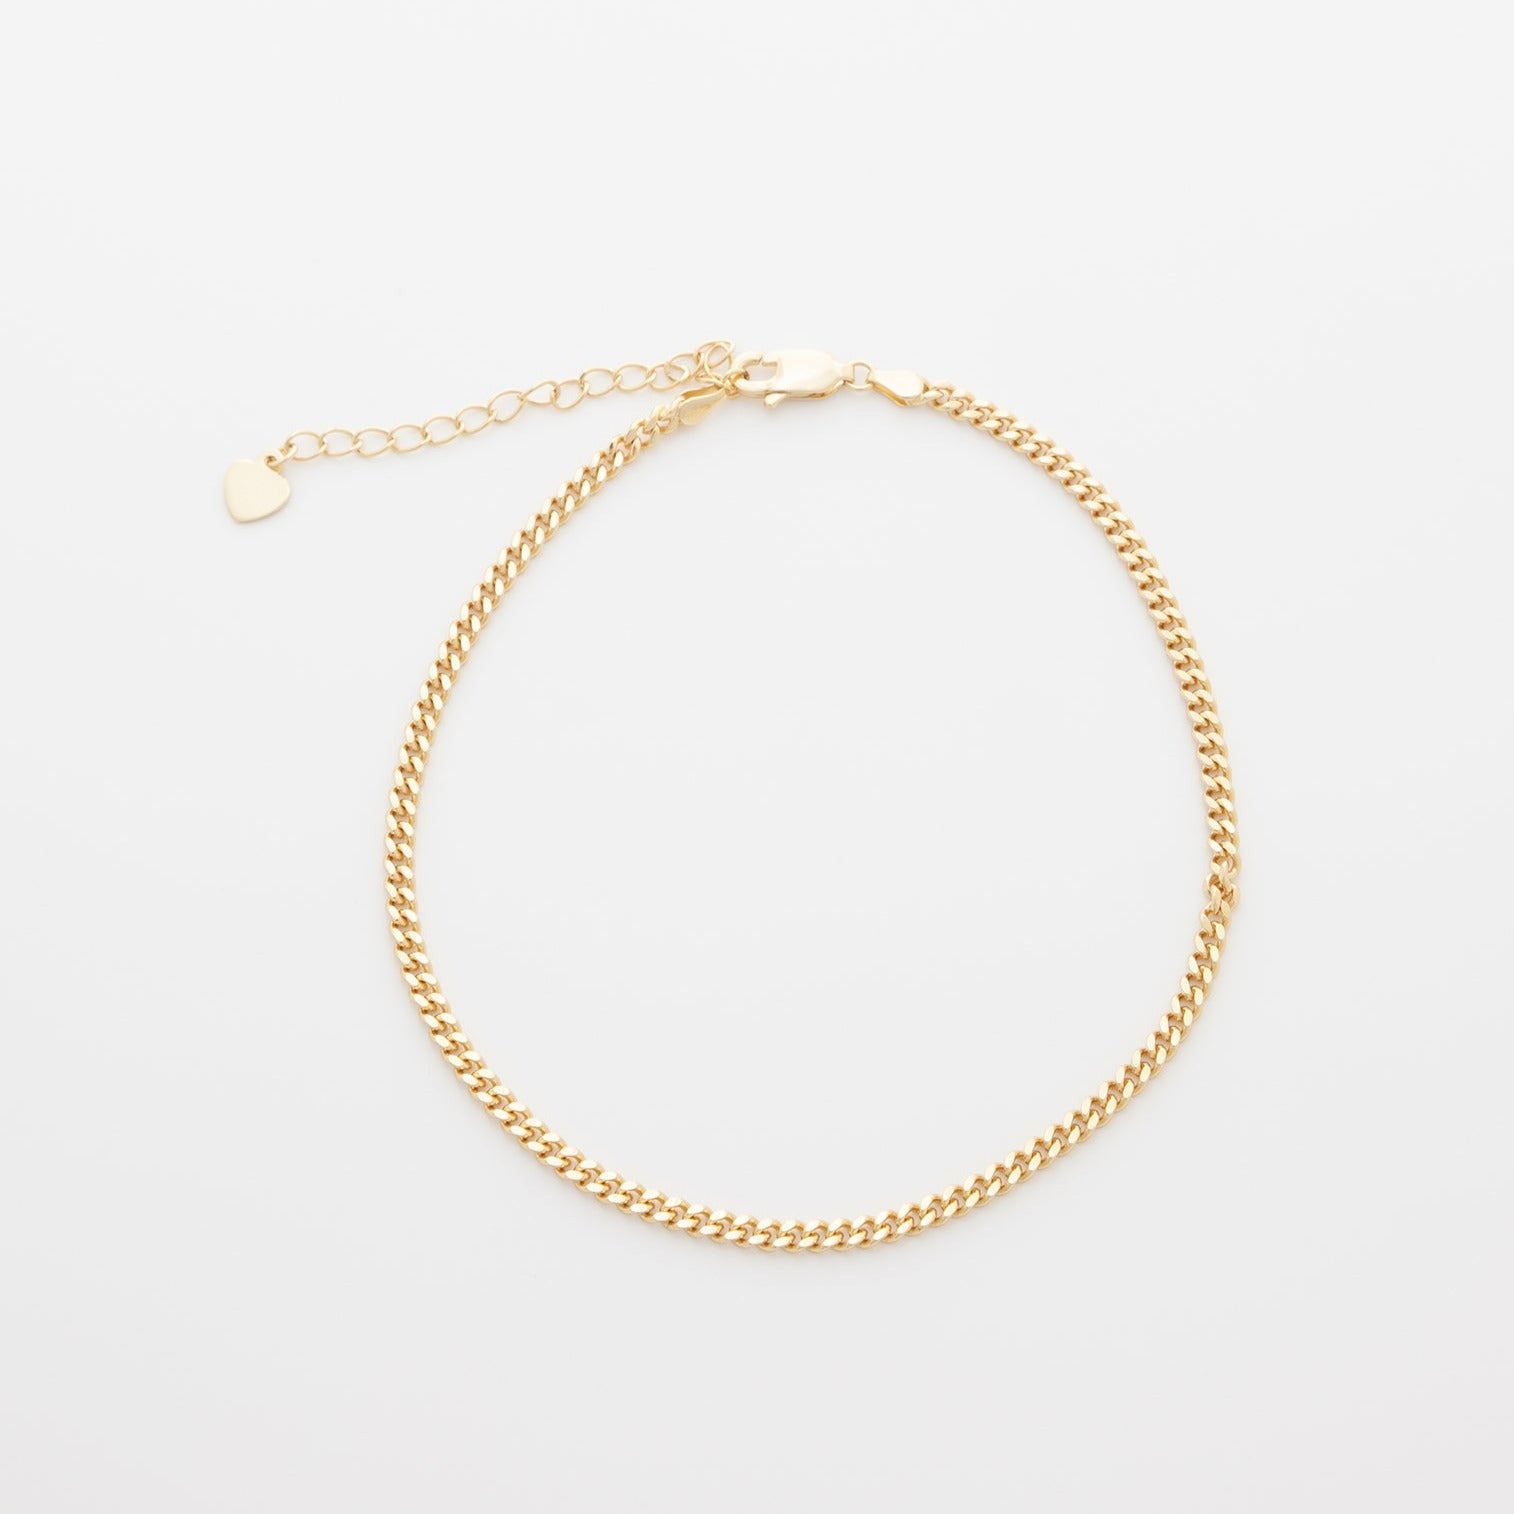 Cuban Chain Anklet in Gold